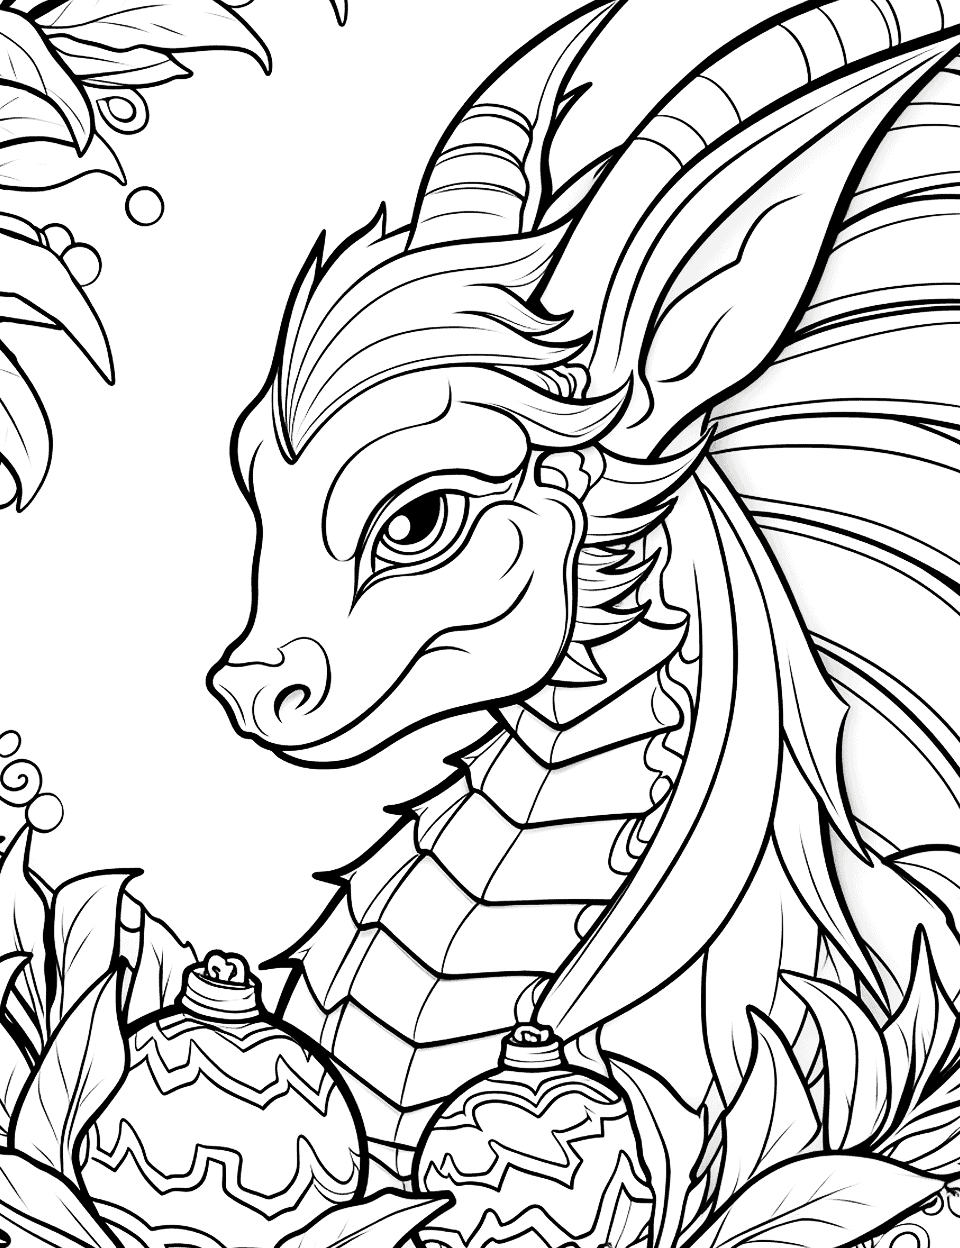 Christmas Day Adult Coloring Page - A dragon celebrating Christmas Day.